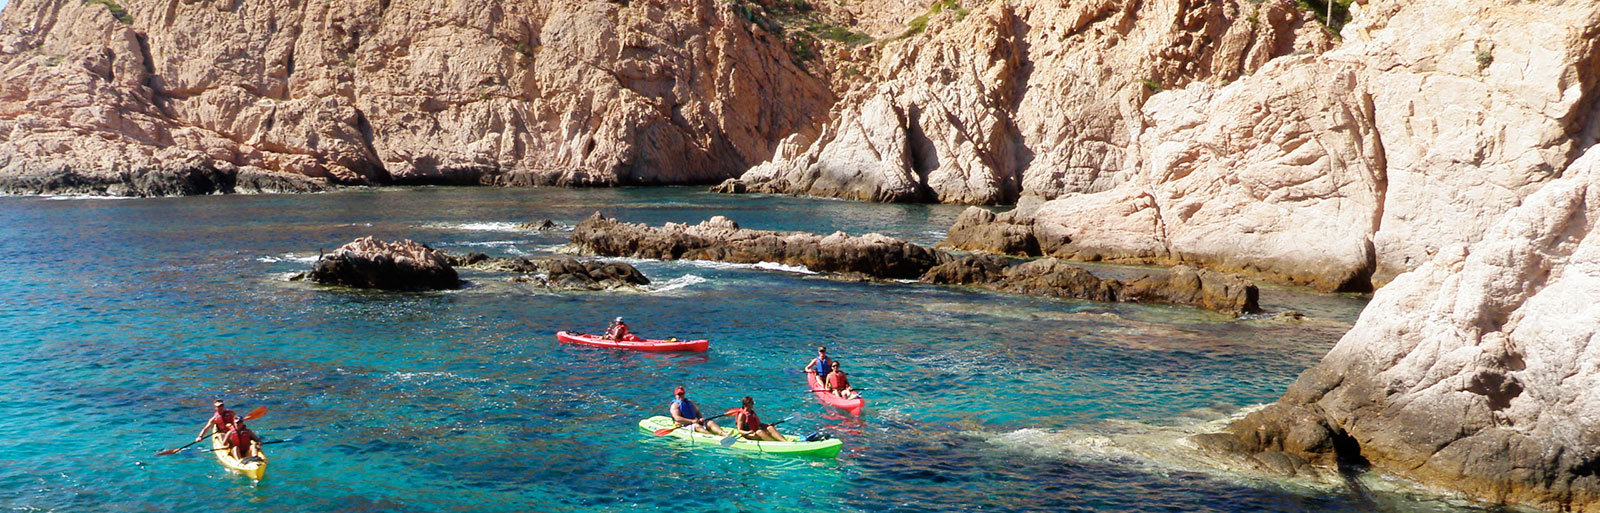 Sea Kayaking & Snorkeling on a Mexico Yoga Retreat: Turquoise Waters